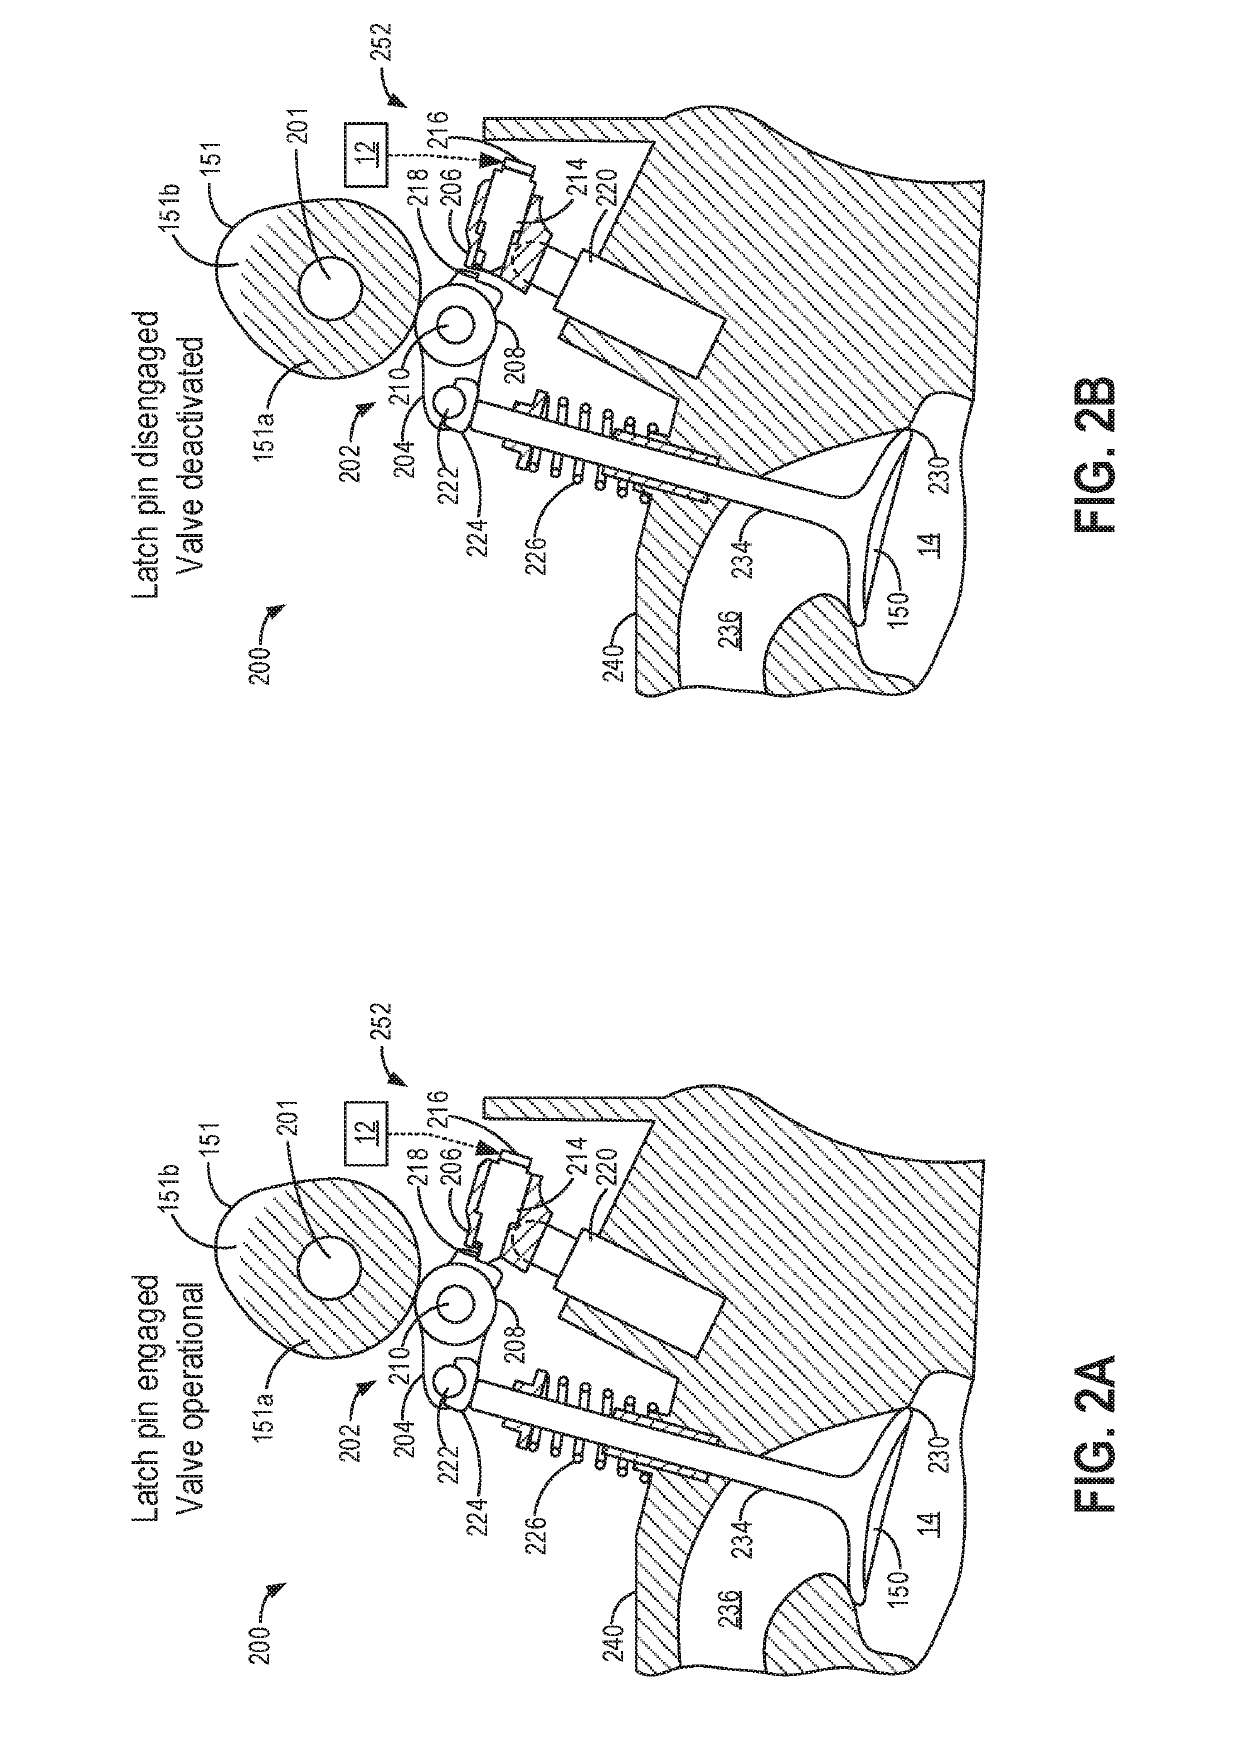 Method and system for variable displacement engine diagnostics